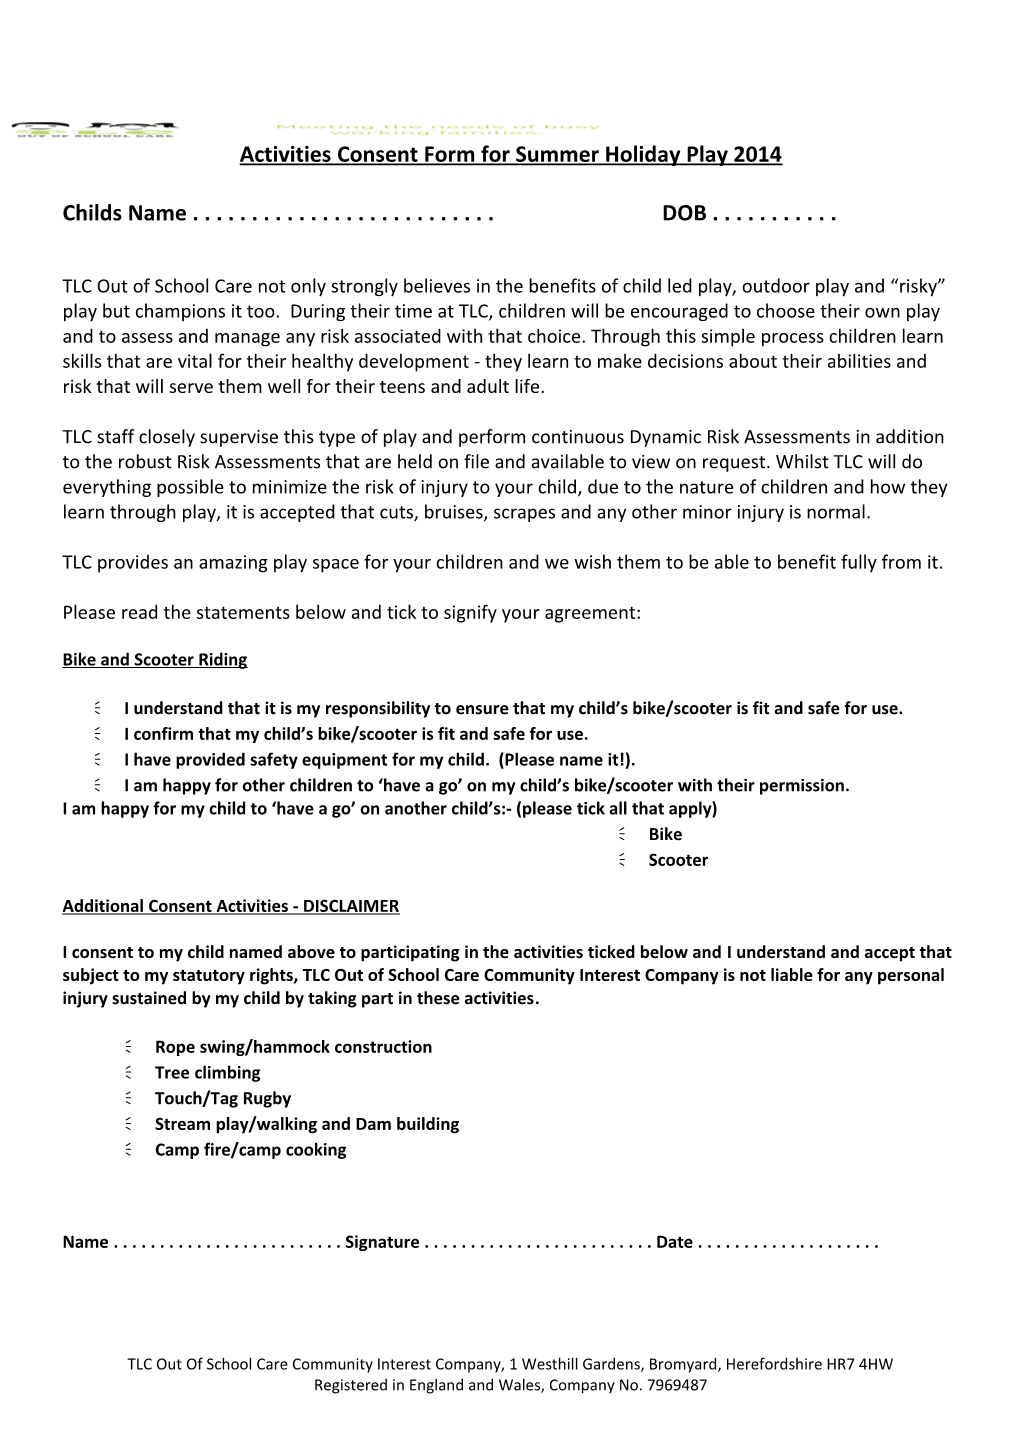 Activities Consent Form for Summer Holiday Play 2014